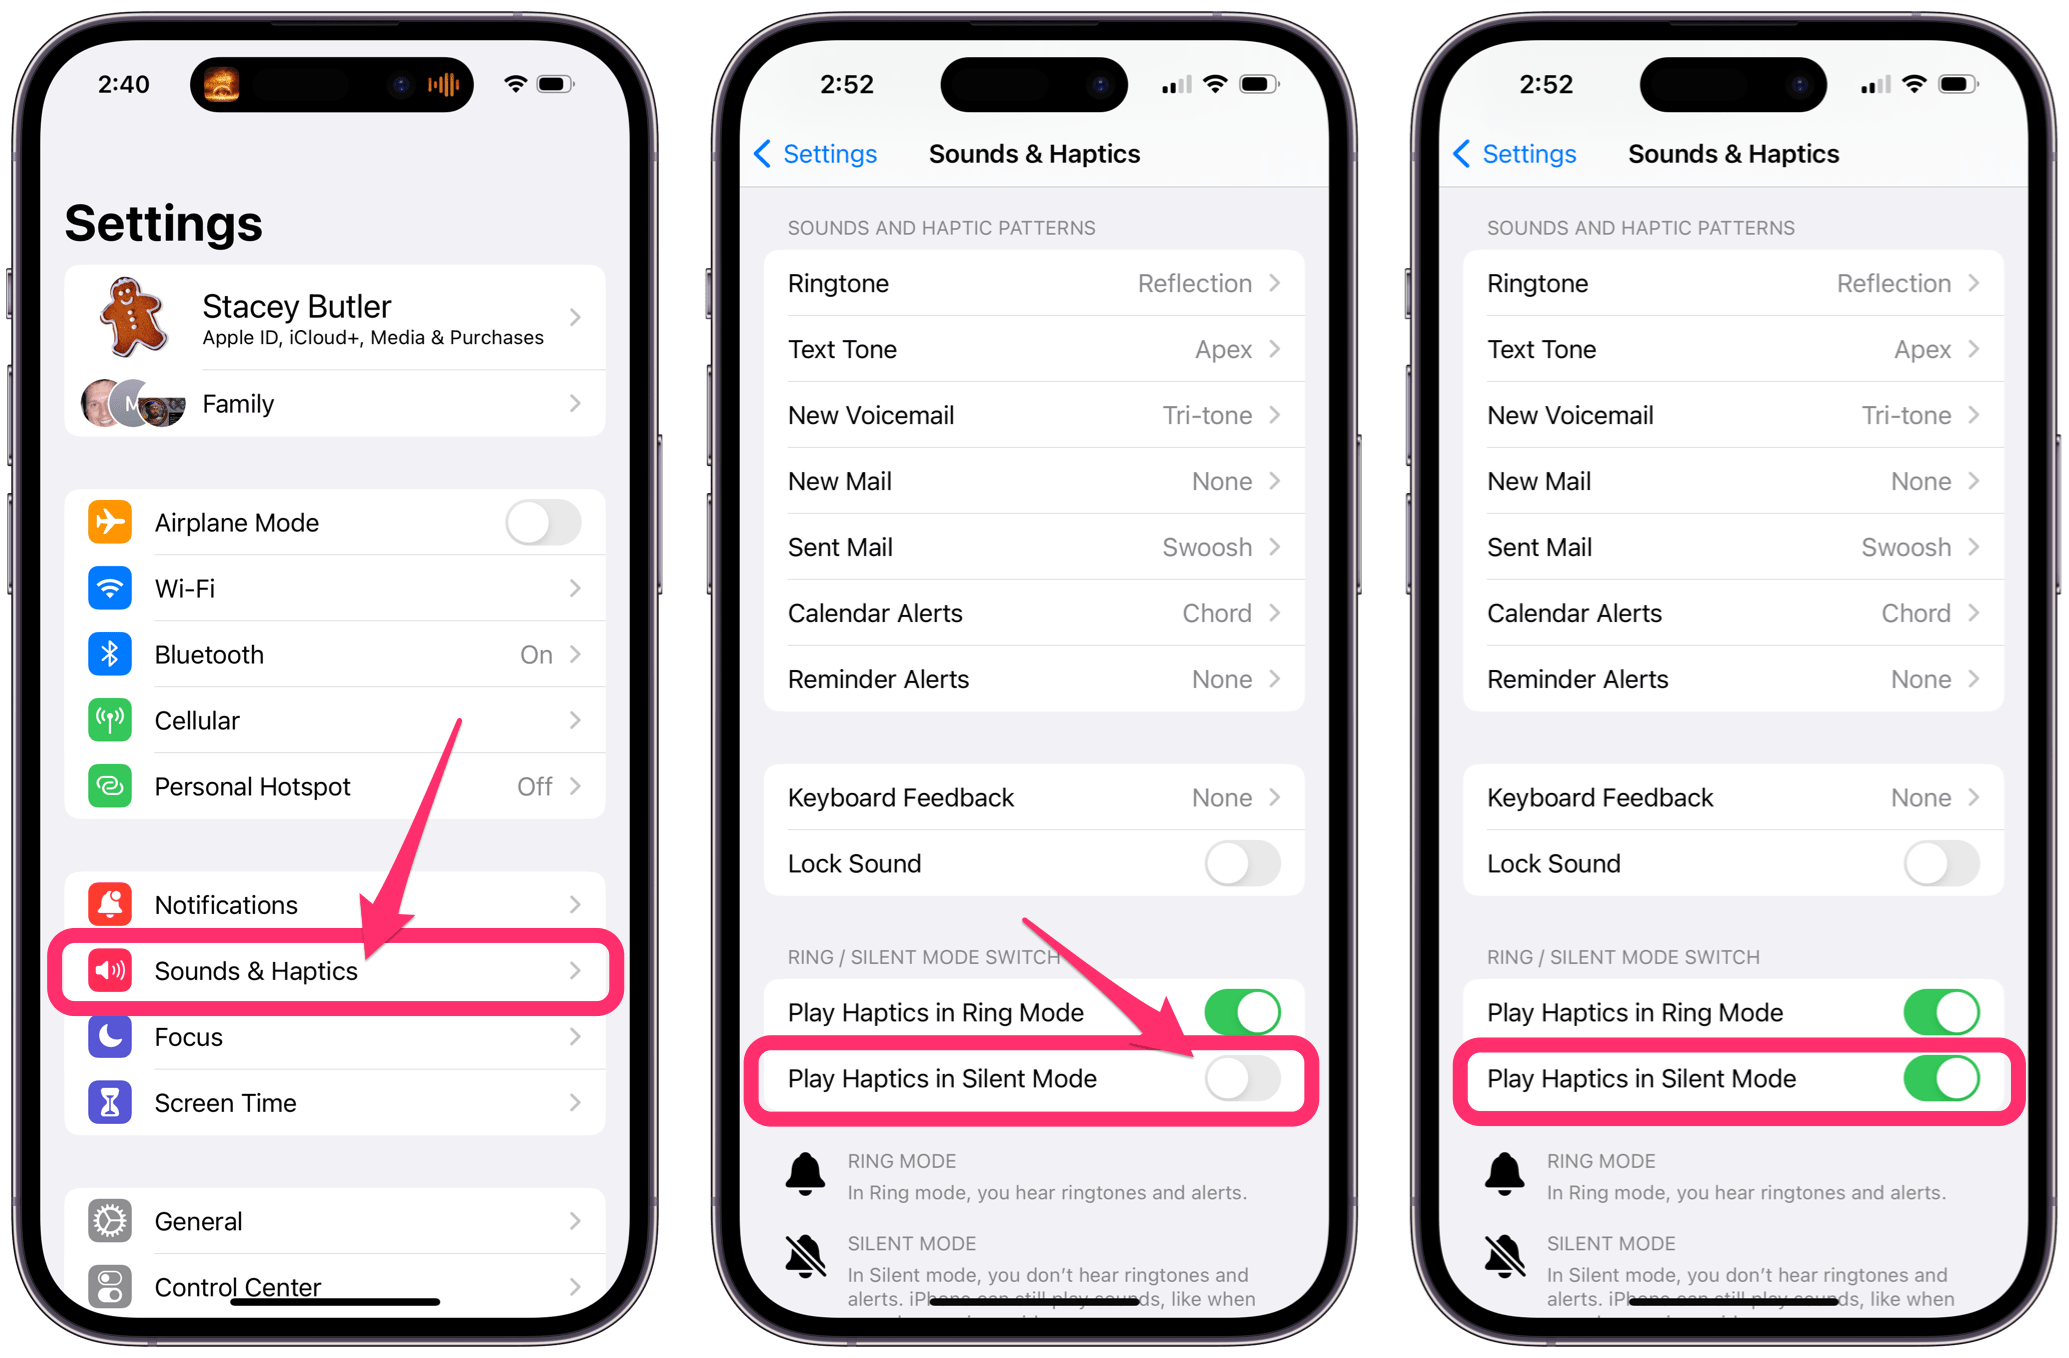 iPhone Settings Sounds & Haptics (vibrations) in Silent Mode